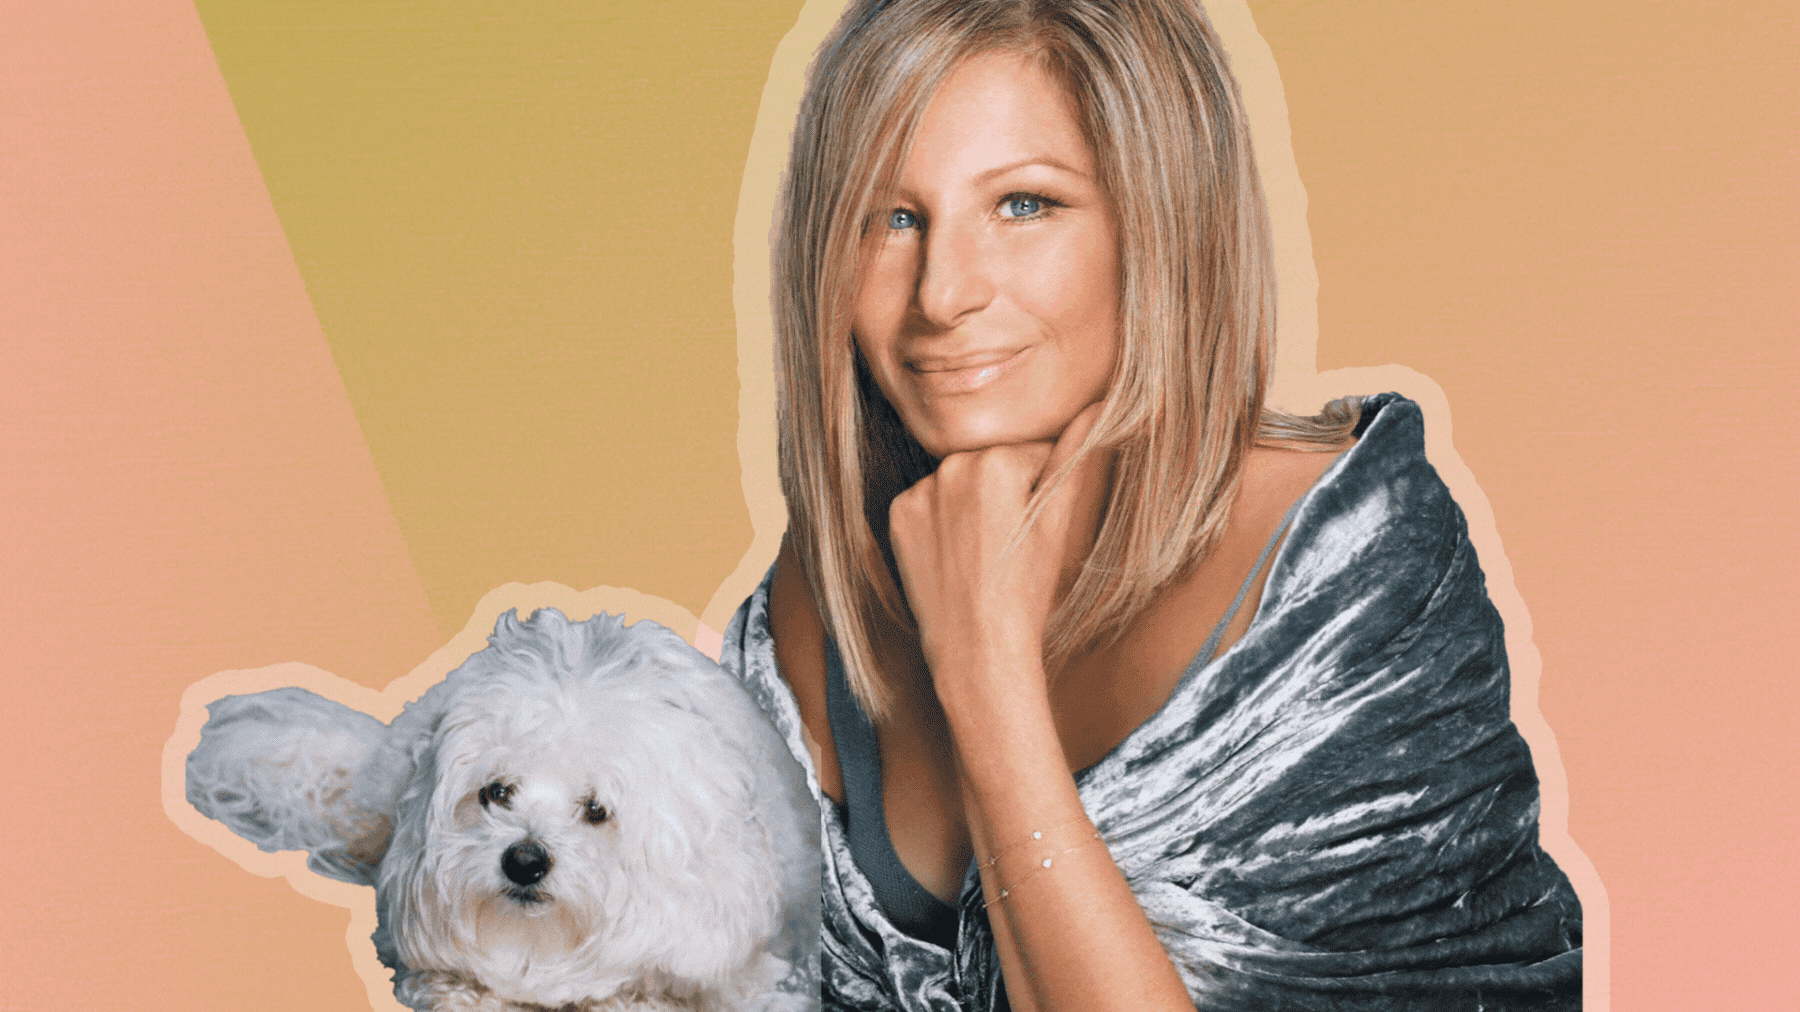 In her book 'My Passion For Design,' Streisand chronicled her costly quest to build the perfect home. 